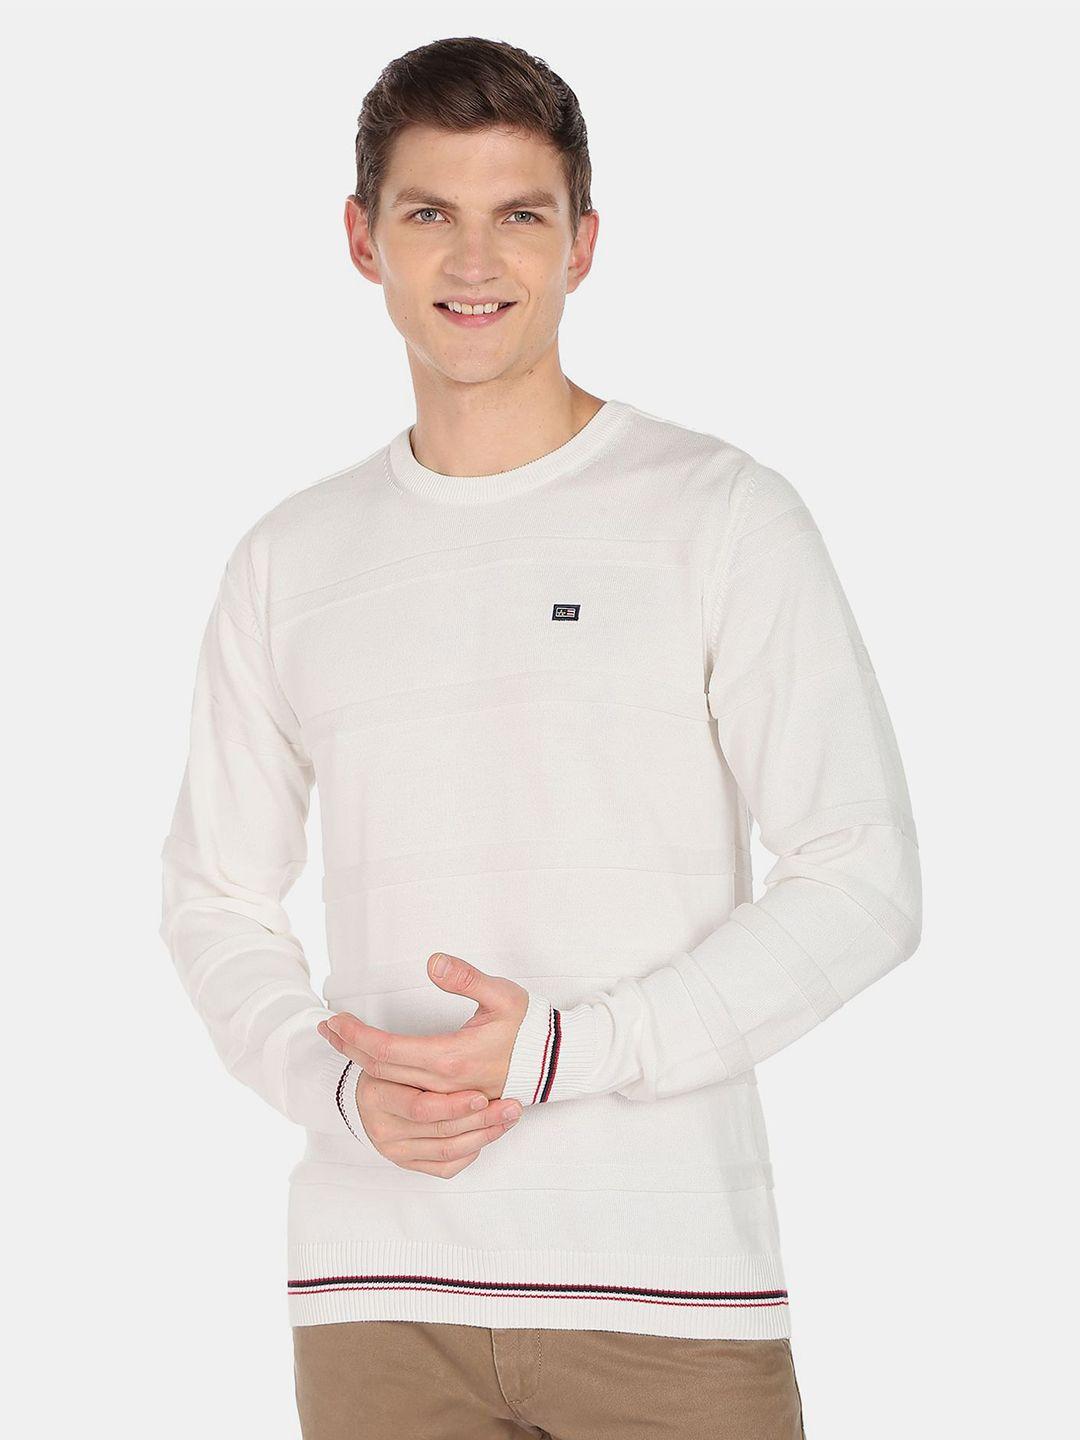 arrow sport men solid round neck long sleeves pullover